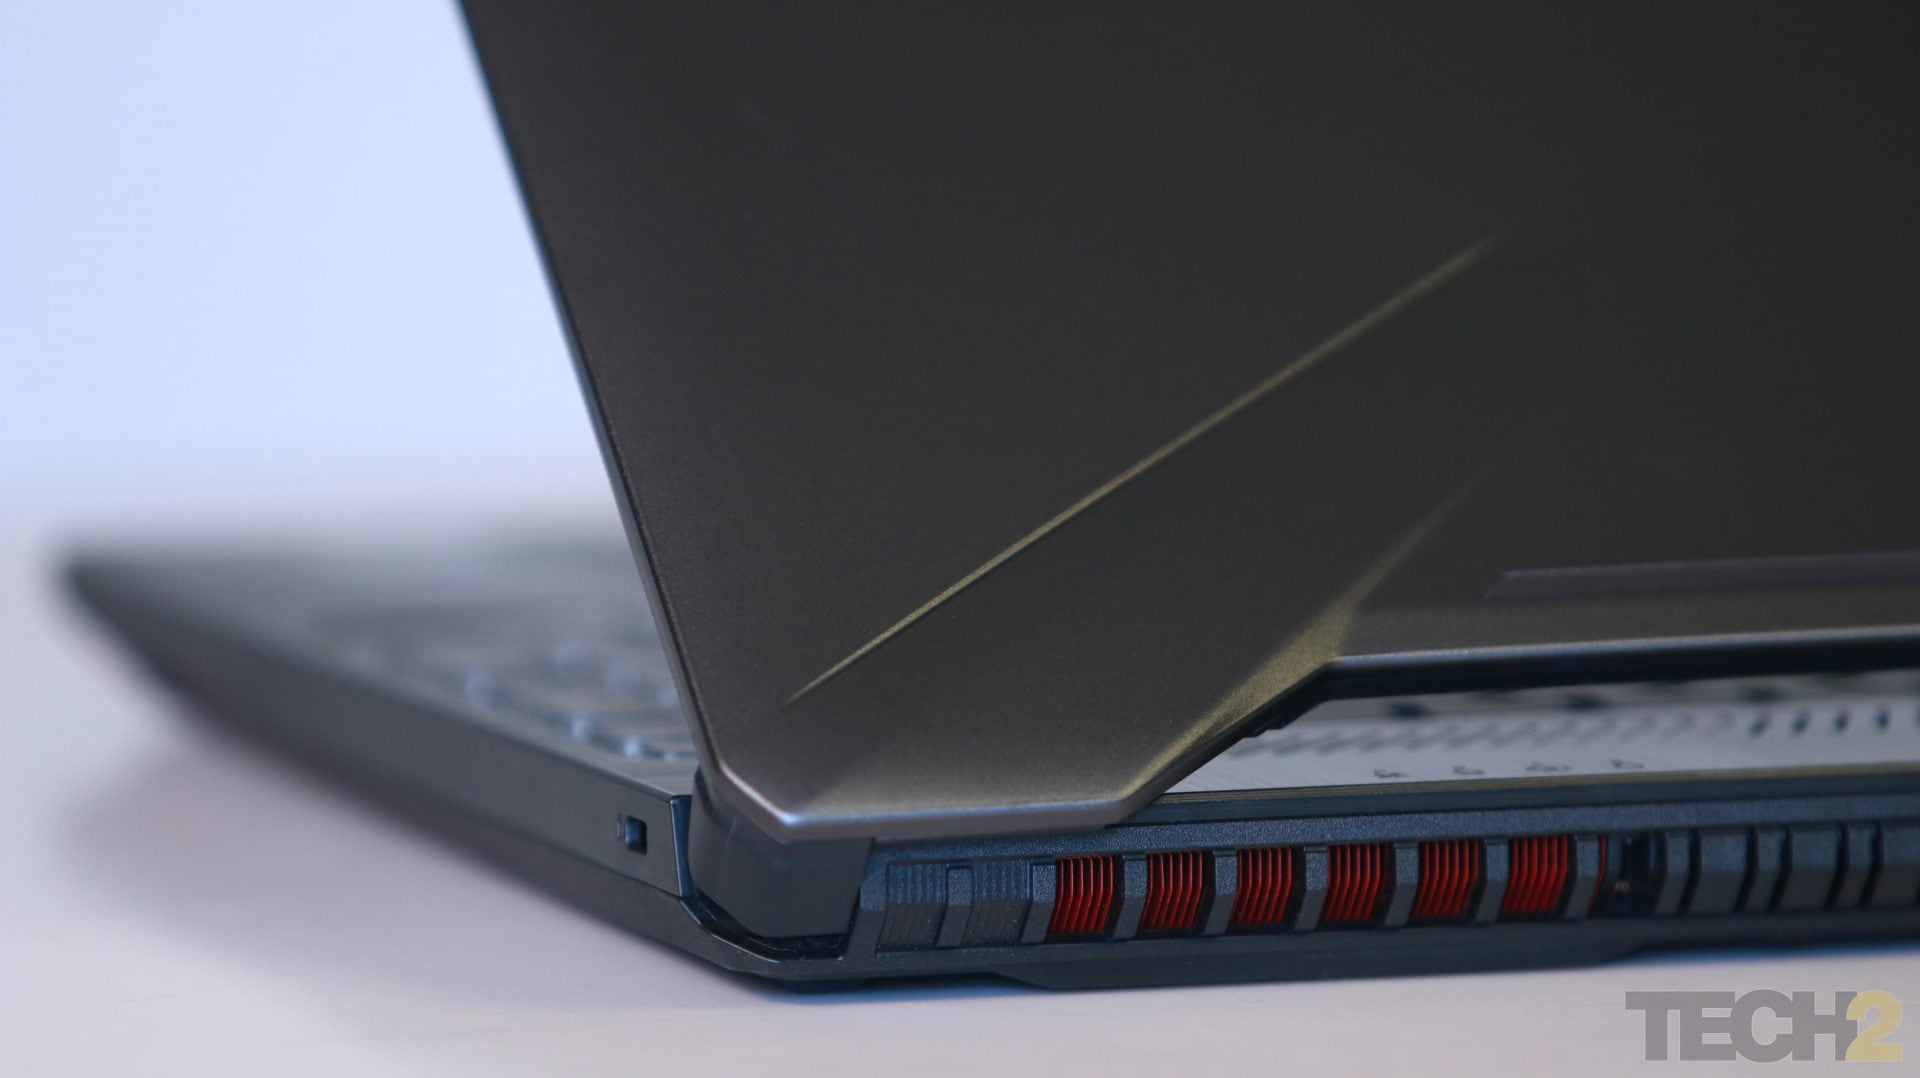 There are vents for air circulation on the bottom and behind the main chassis of the laptop. Image: tech2/Omkar